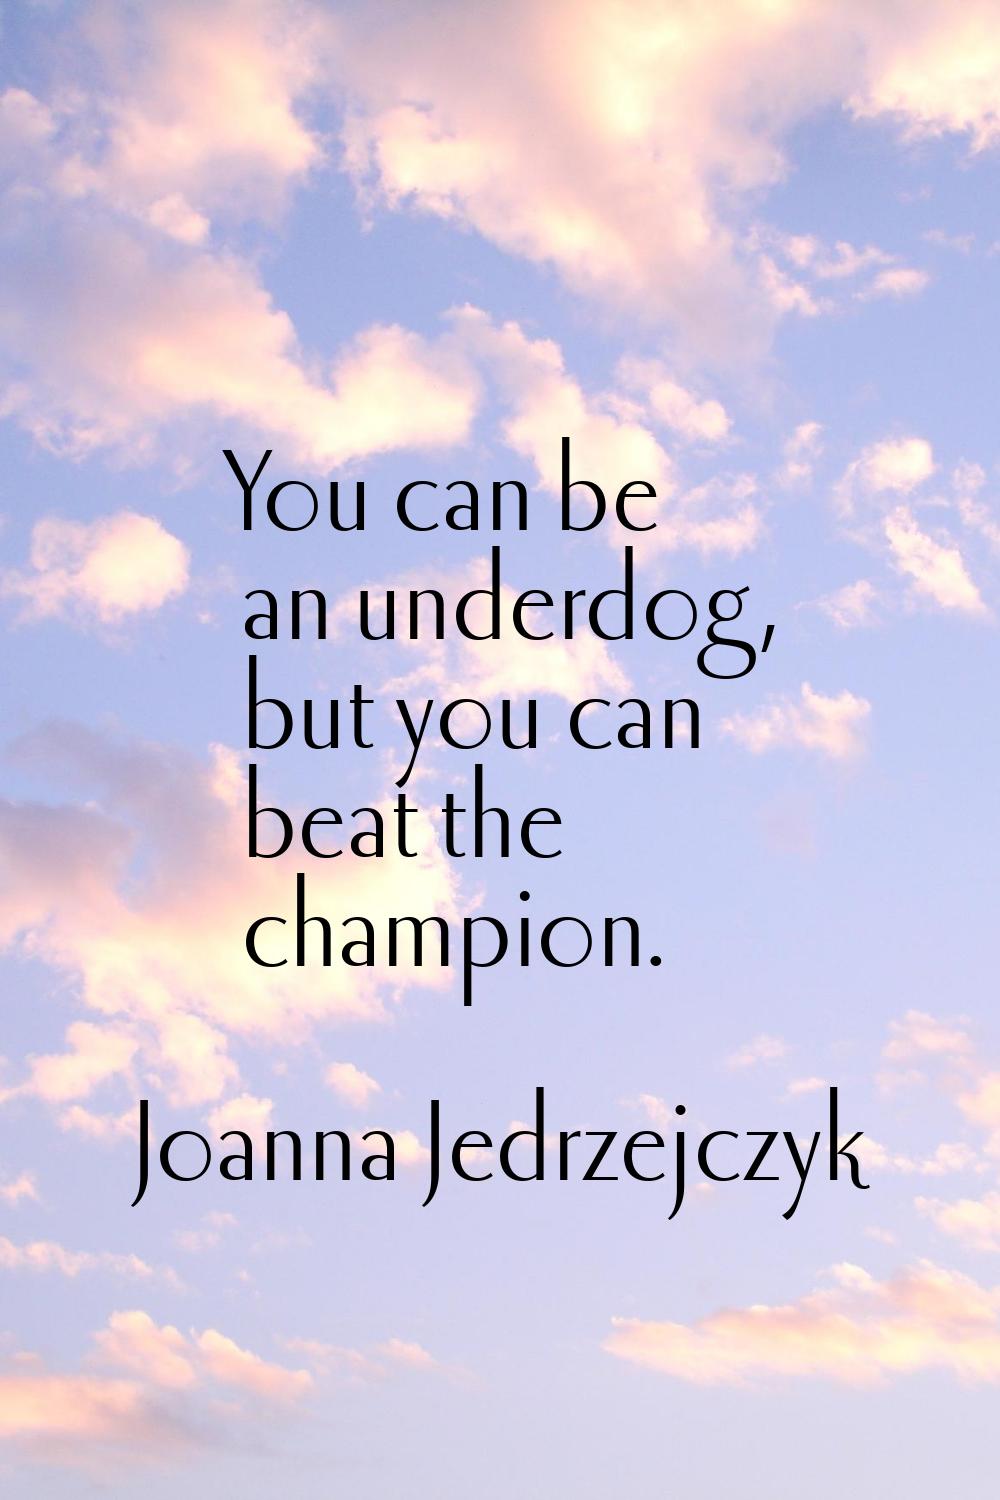 You can be an underdog, but you can beat the champion.